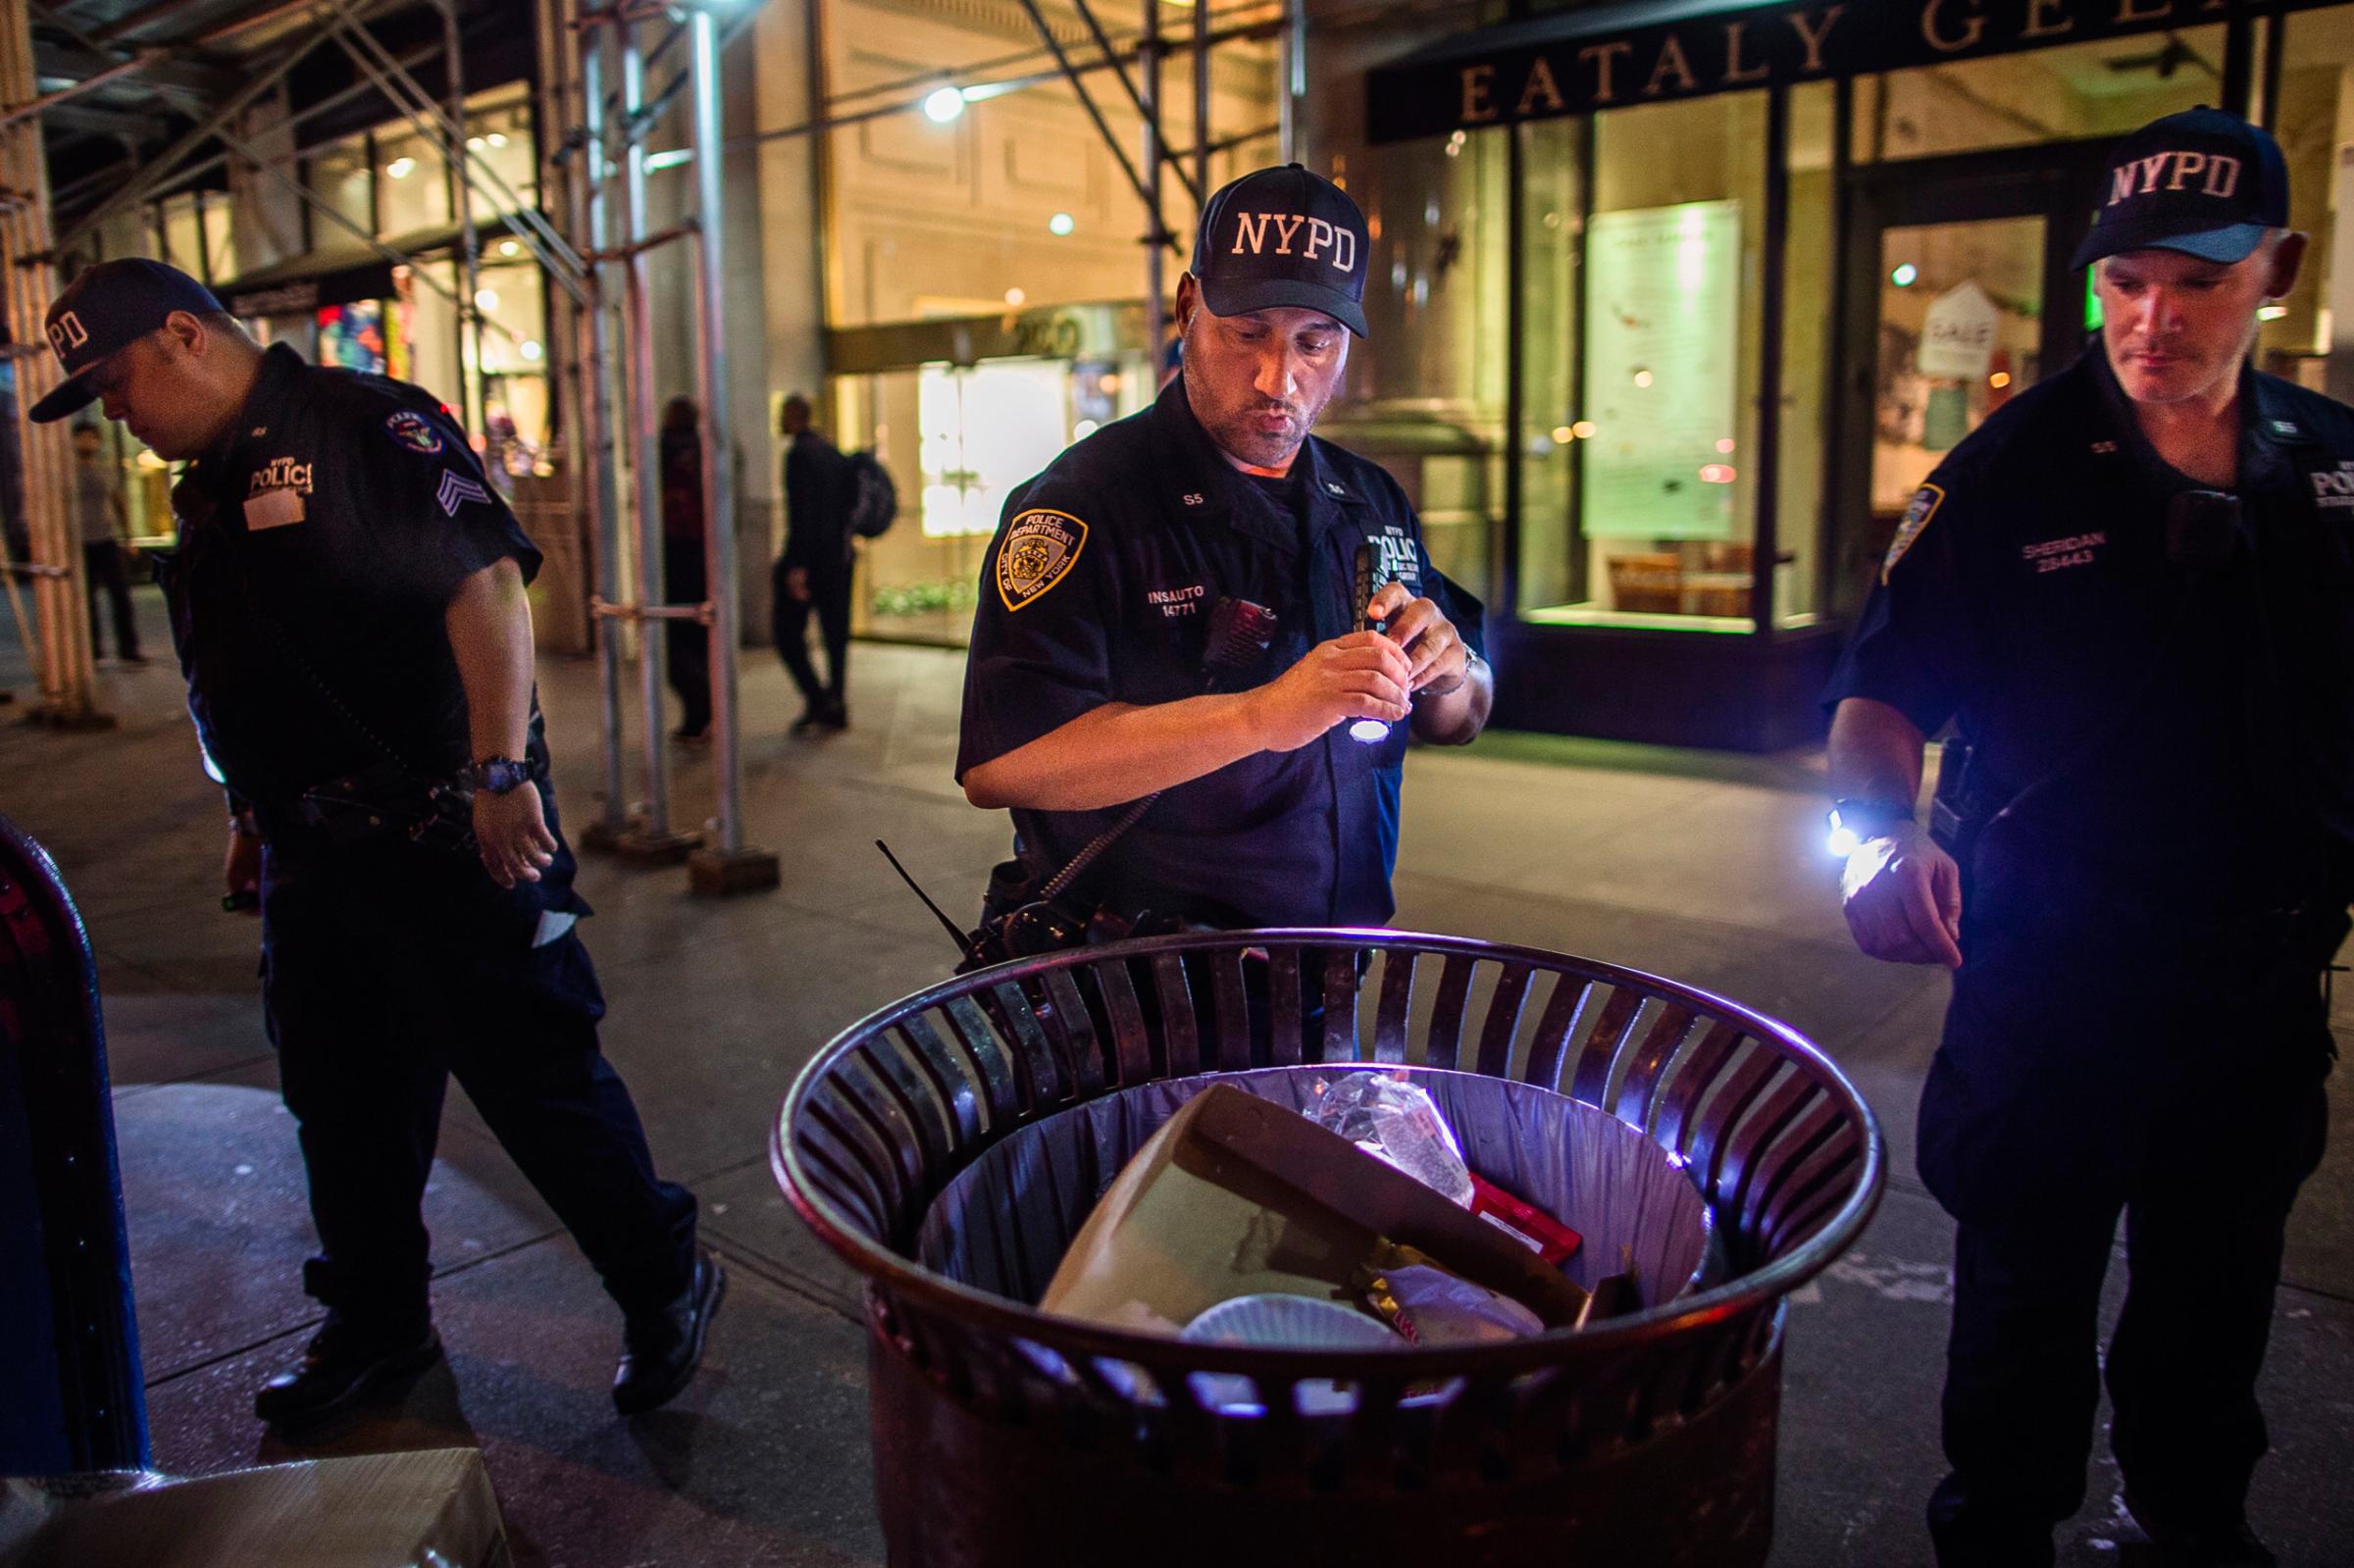 Police officers look for suspicious packages along Fifth Avenue near the scene of an explosion on West 23rd Street and 6th Avenue in Manhattan's Chelsea neighborhood, in New York, early Sunday, Sept. 18, 2016. An explosion rocked the block of West 23rd Street between Sixth and Seventh Avenues at 8:30 p.m. Saturday. Officials said more than two dozen people were injured. Most of the injuries were minor. (AP Photo/Andres Kudacki)